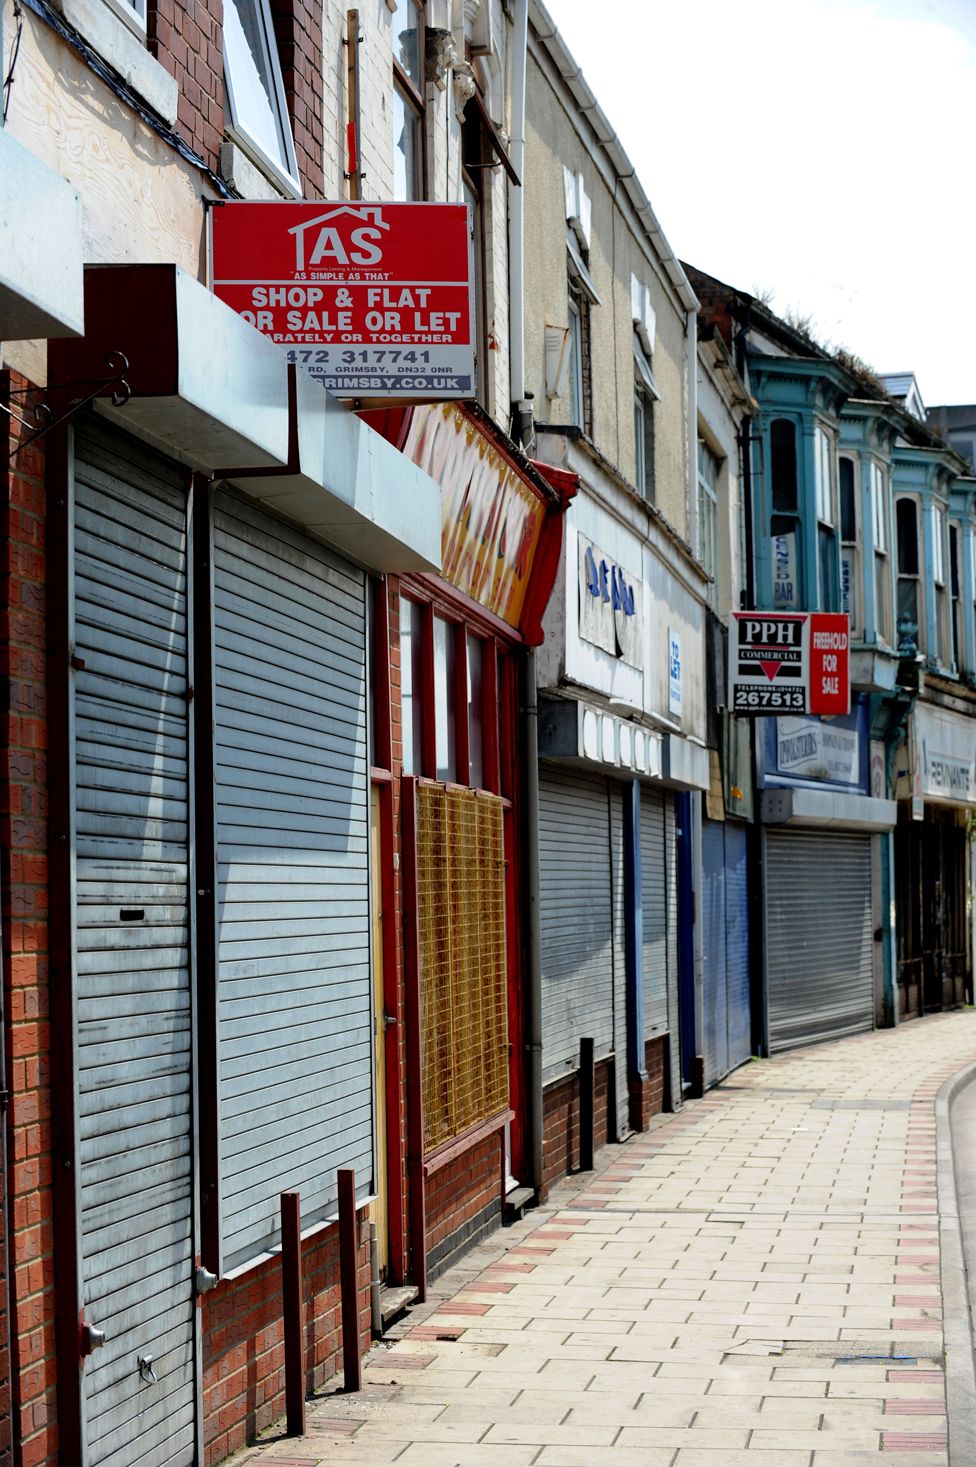 Business premises lie empty in Freeman street in Grimsby, it used to be the town's main shopping area